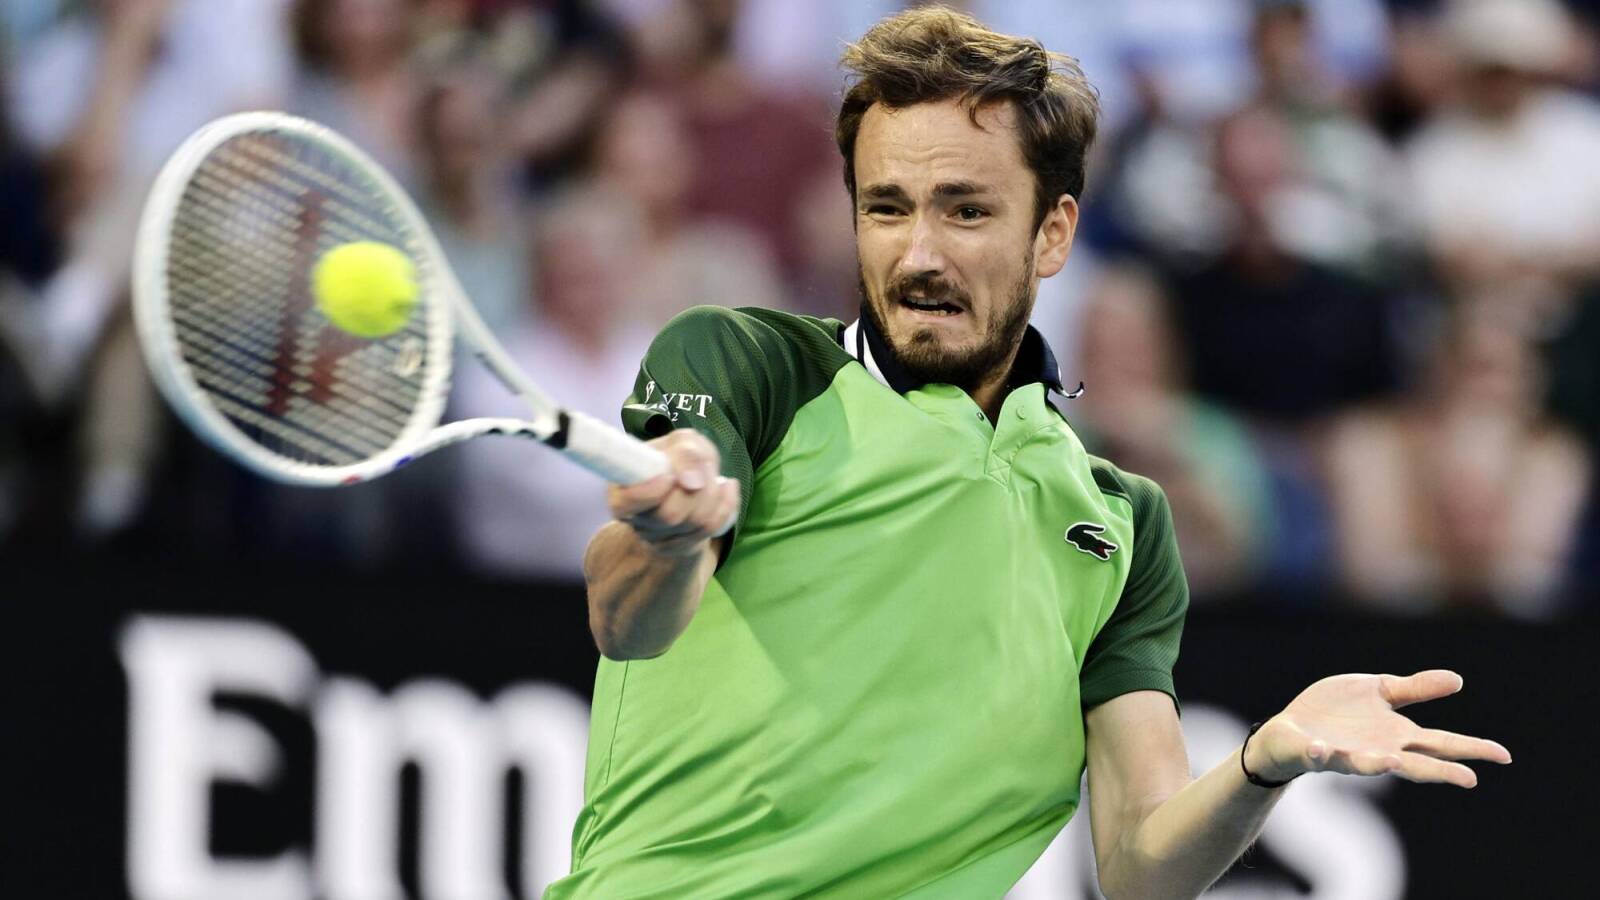 Daniil Medvedev identifies aspects to 'change for Indian Wells and Miami' after a shocking loss against Ugo Humbert as he fails to defend his title in Dubai